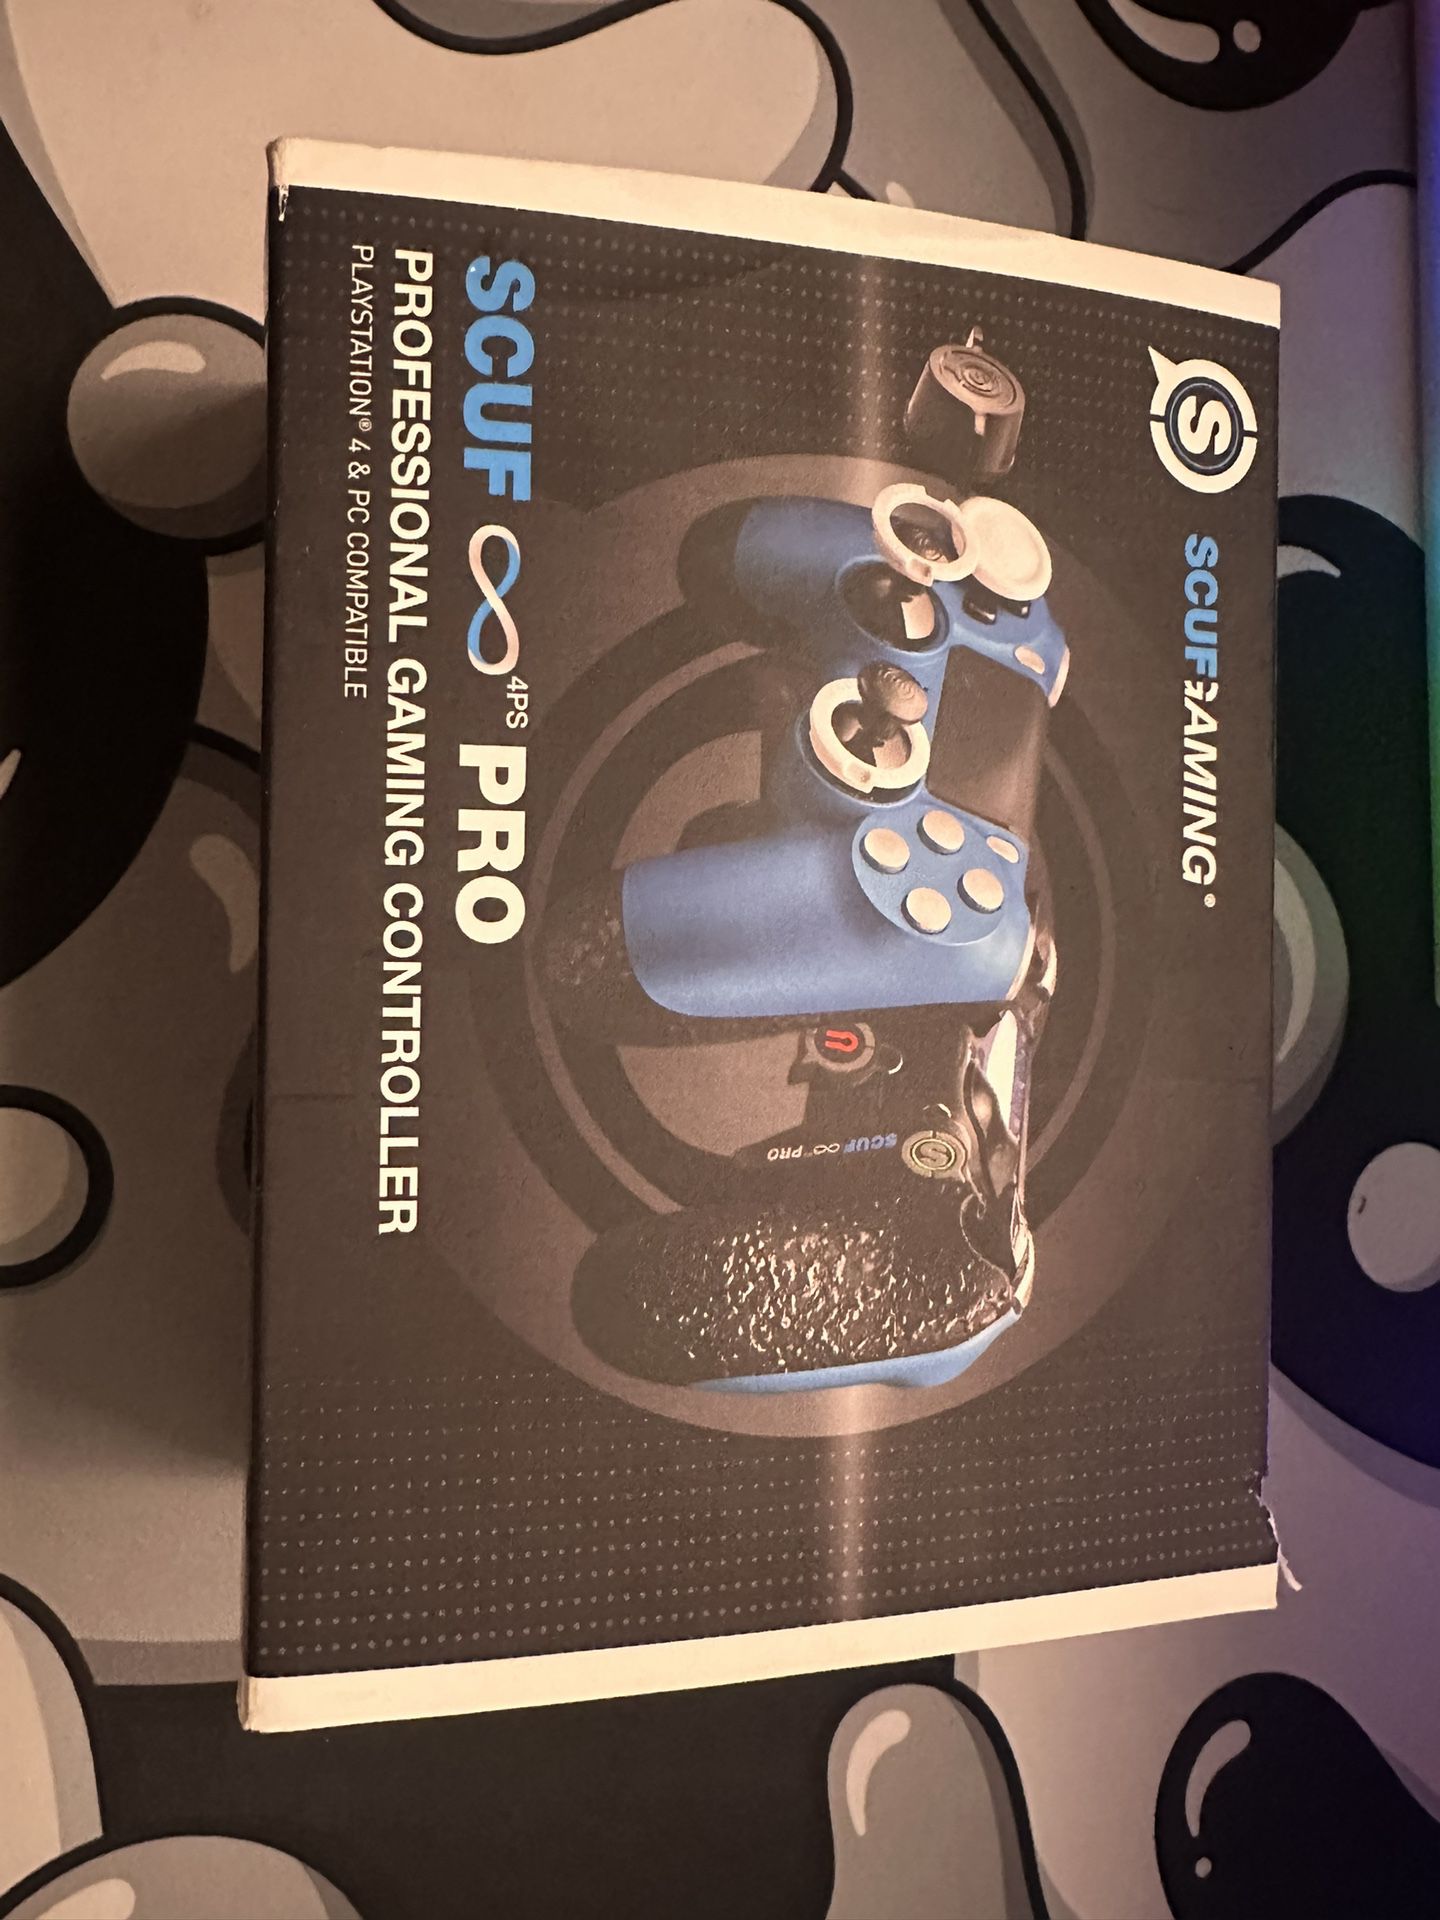 PS4 Scuf Controller 